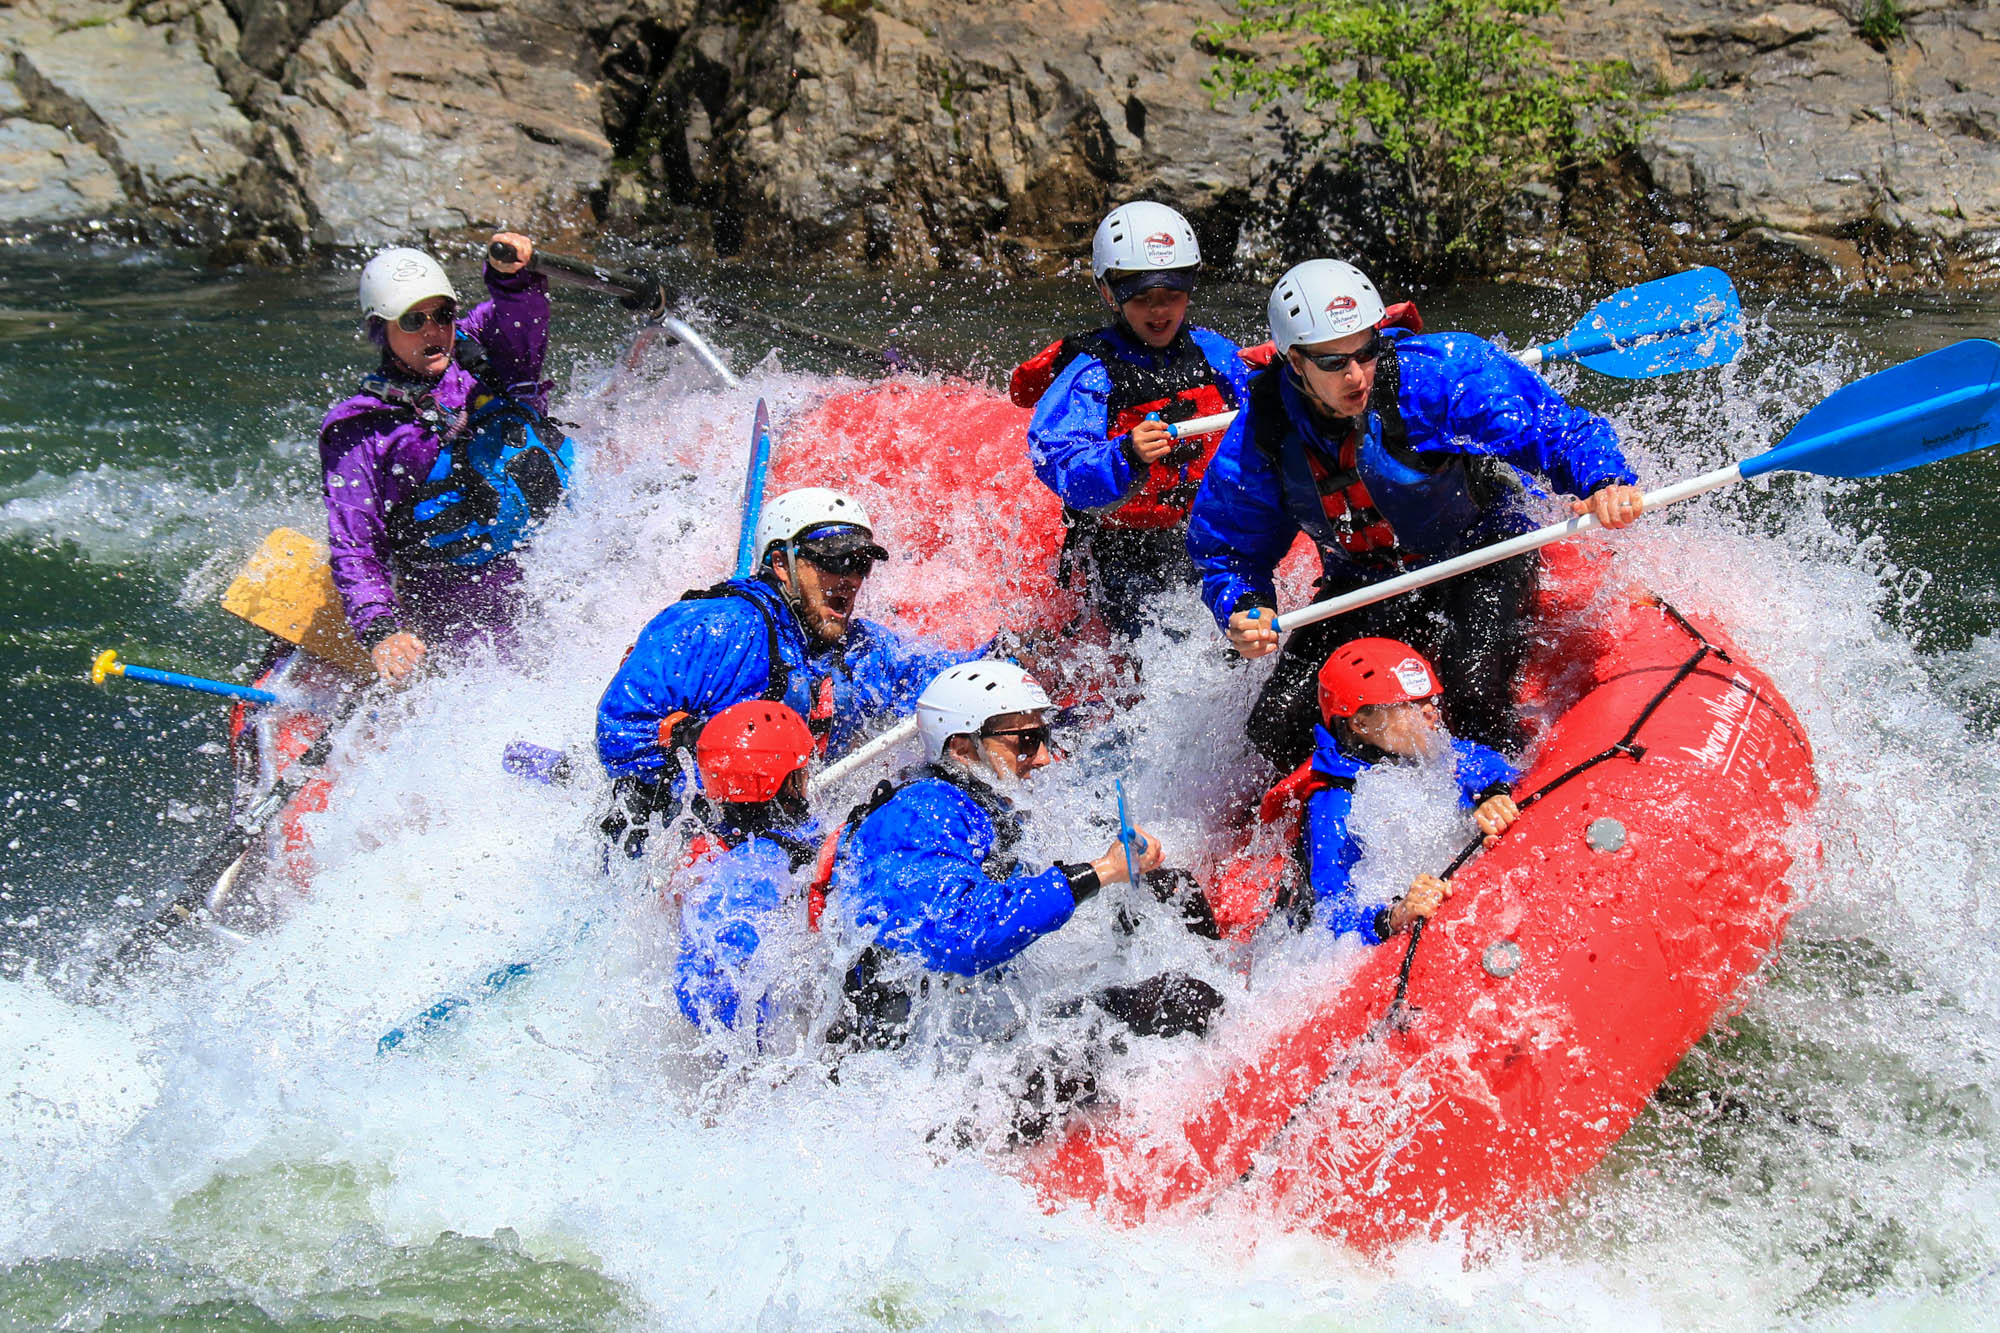 AWE Whitewater Rafting in Satan's Cesspool Rapid South Fork American River Gorge in Northern California